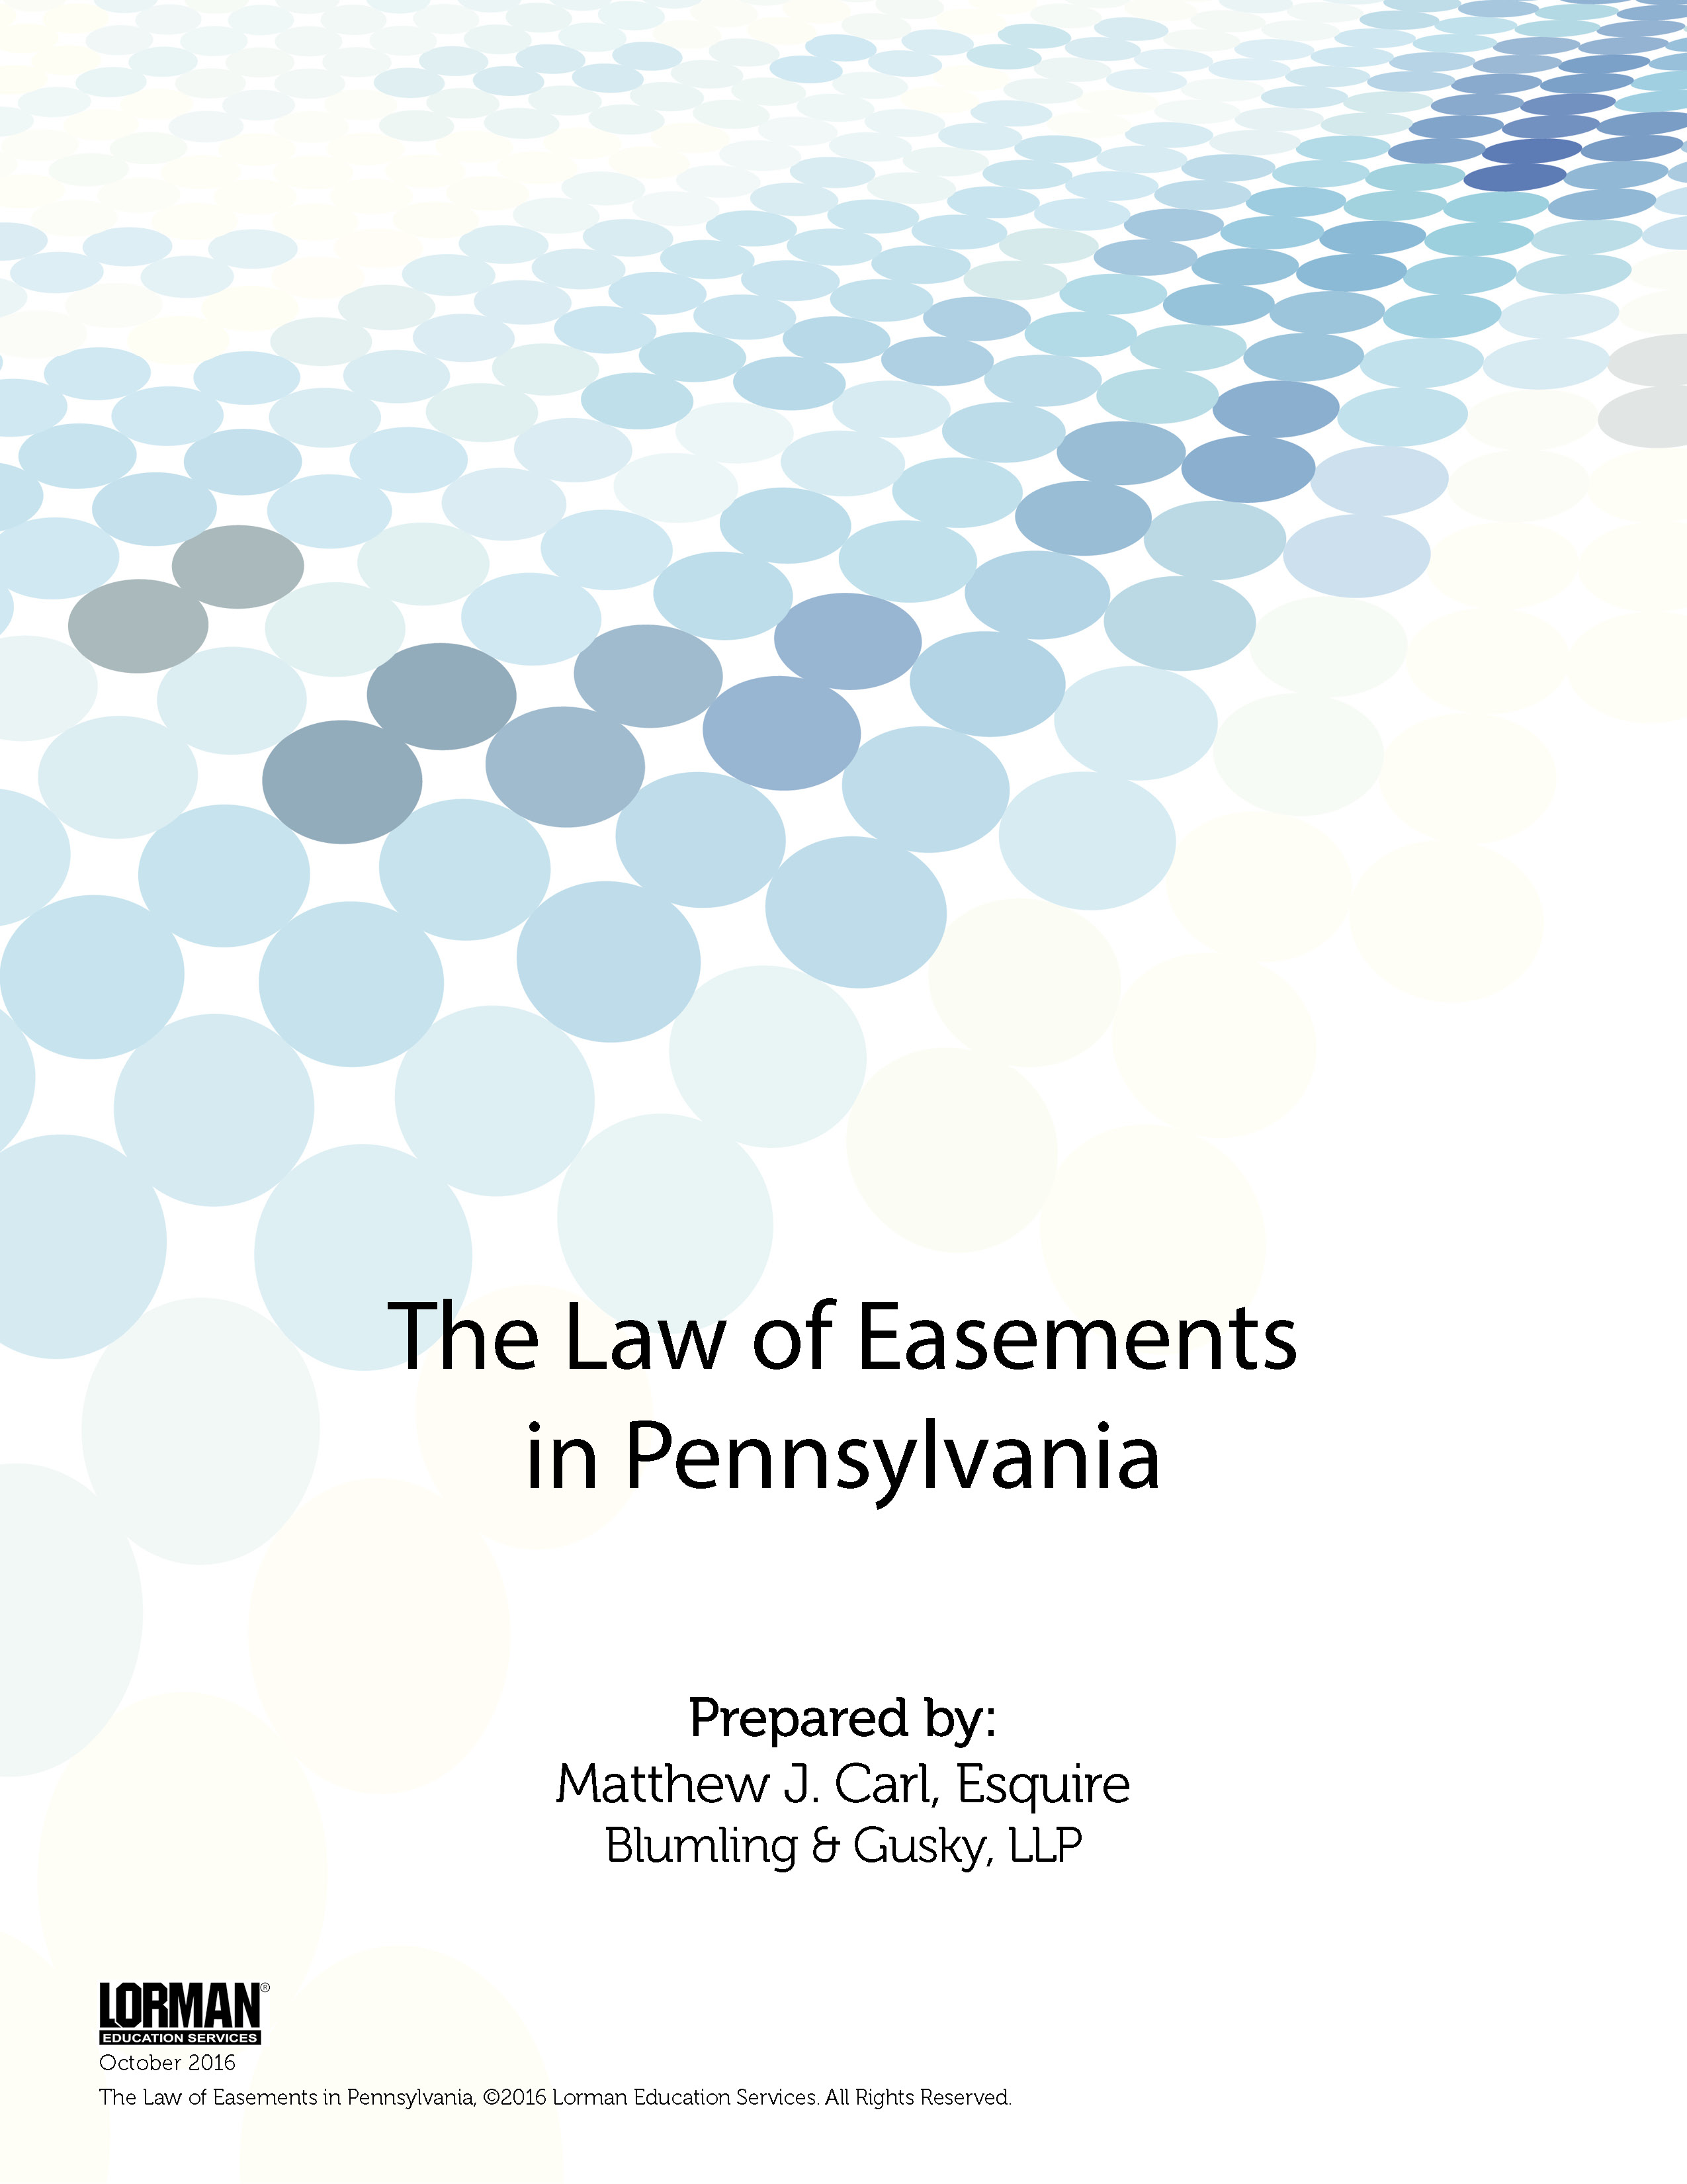 The Law of Easements in Pennsylvania